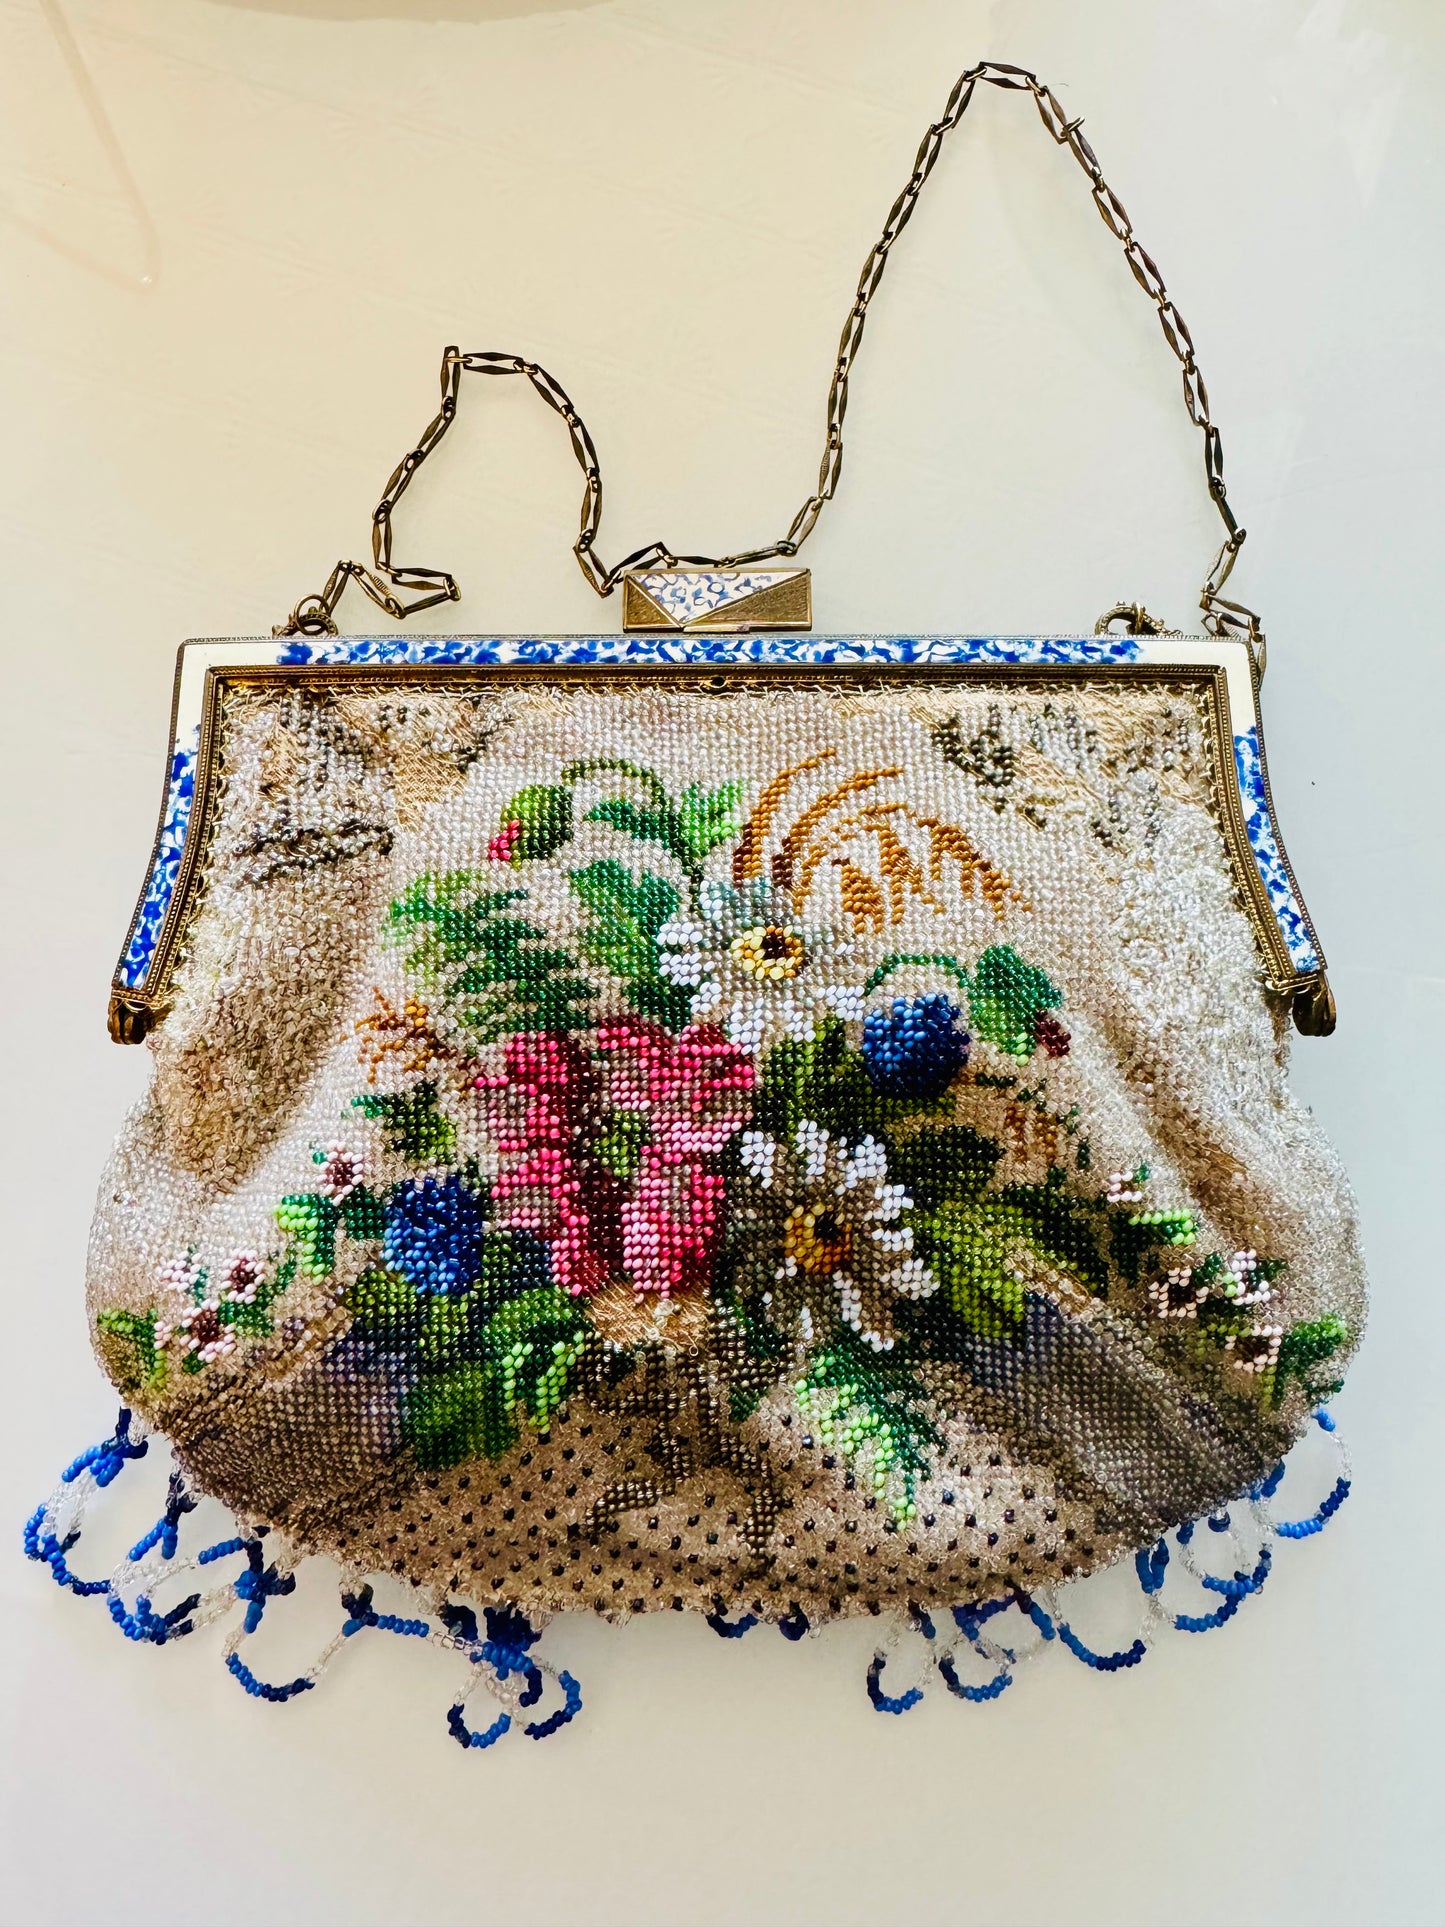 Mint condition 1930s vintage beaded bag with enamel hardware